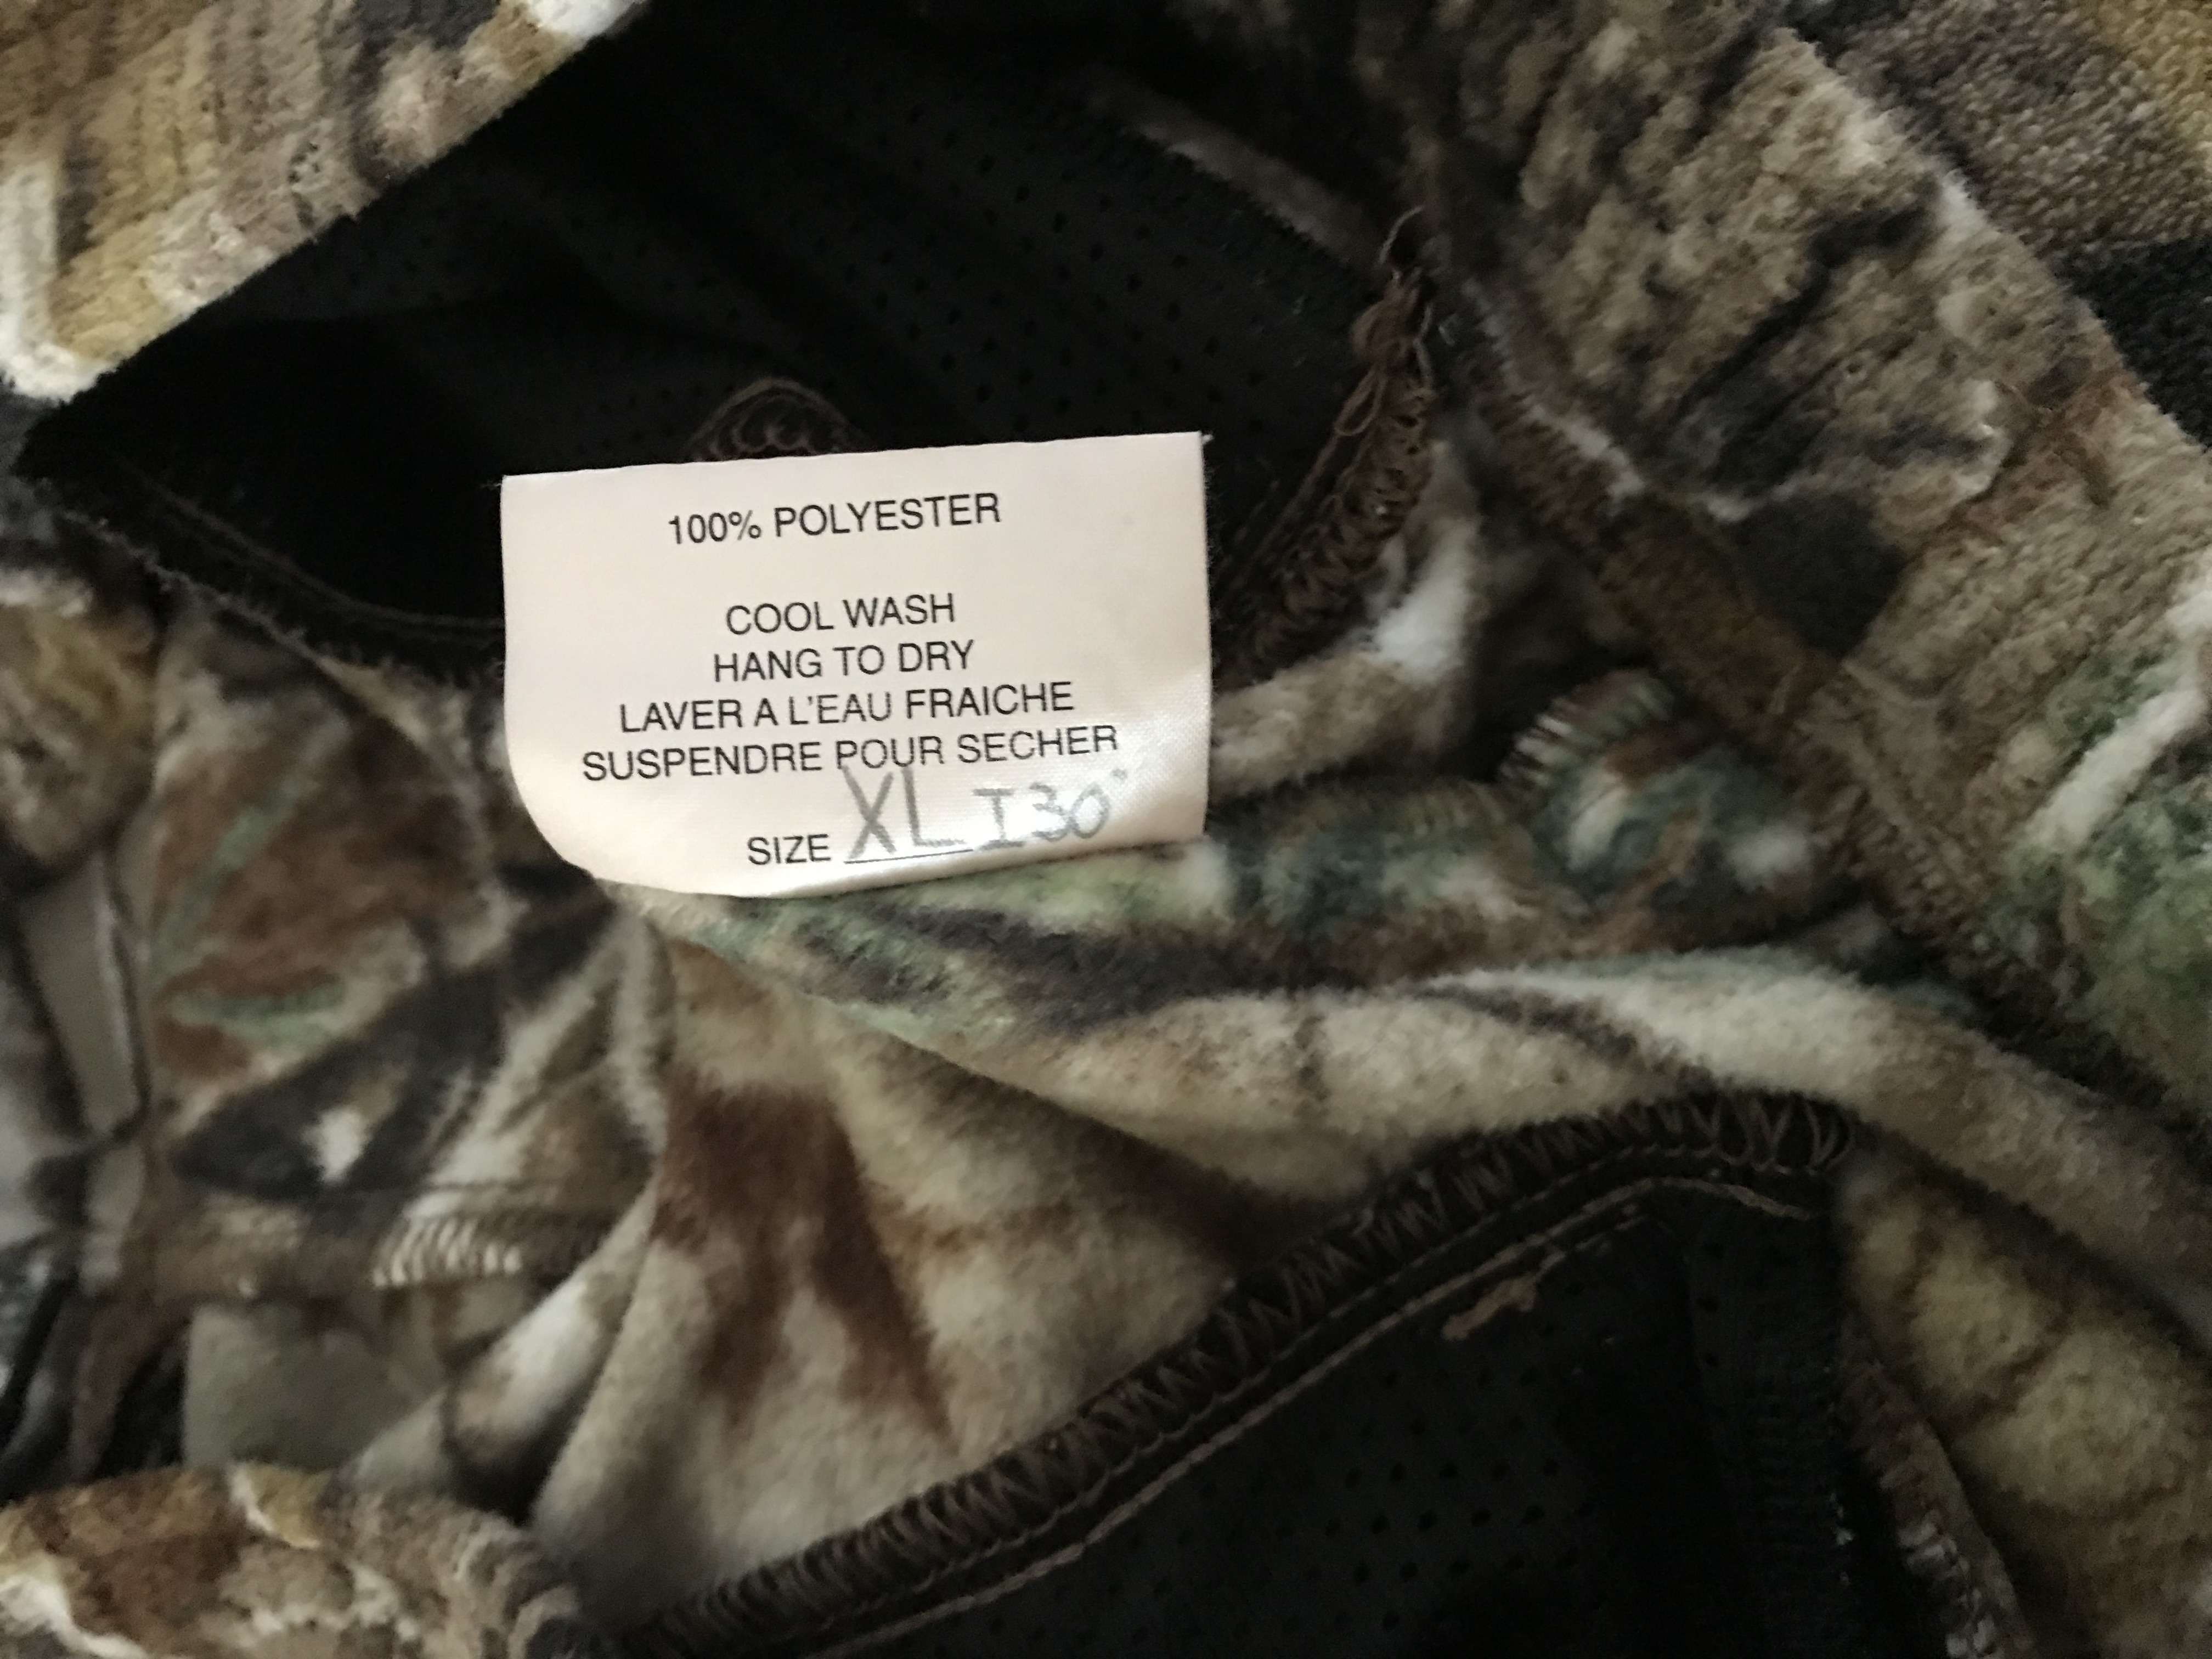 WTS Raven Wear clothing - 24hourcampfire